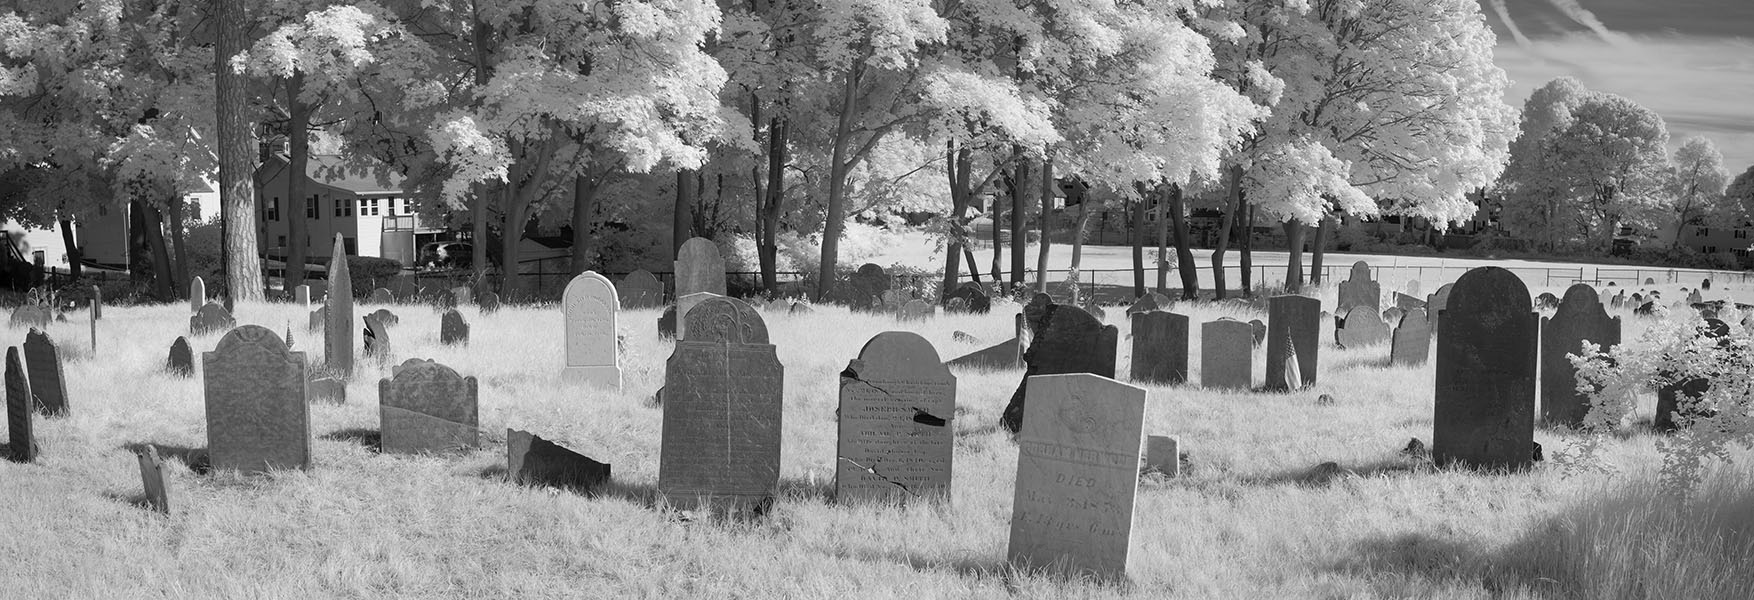 Infrared Photographic Panorama of Old Cemetery.